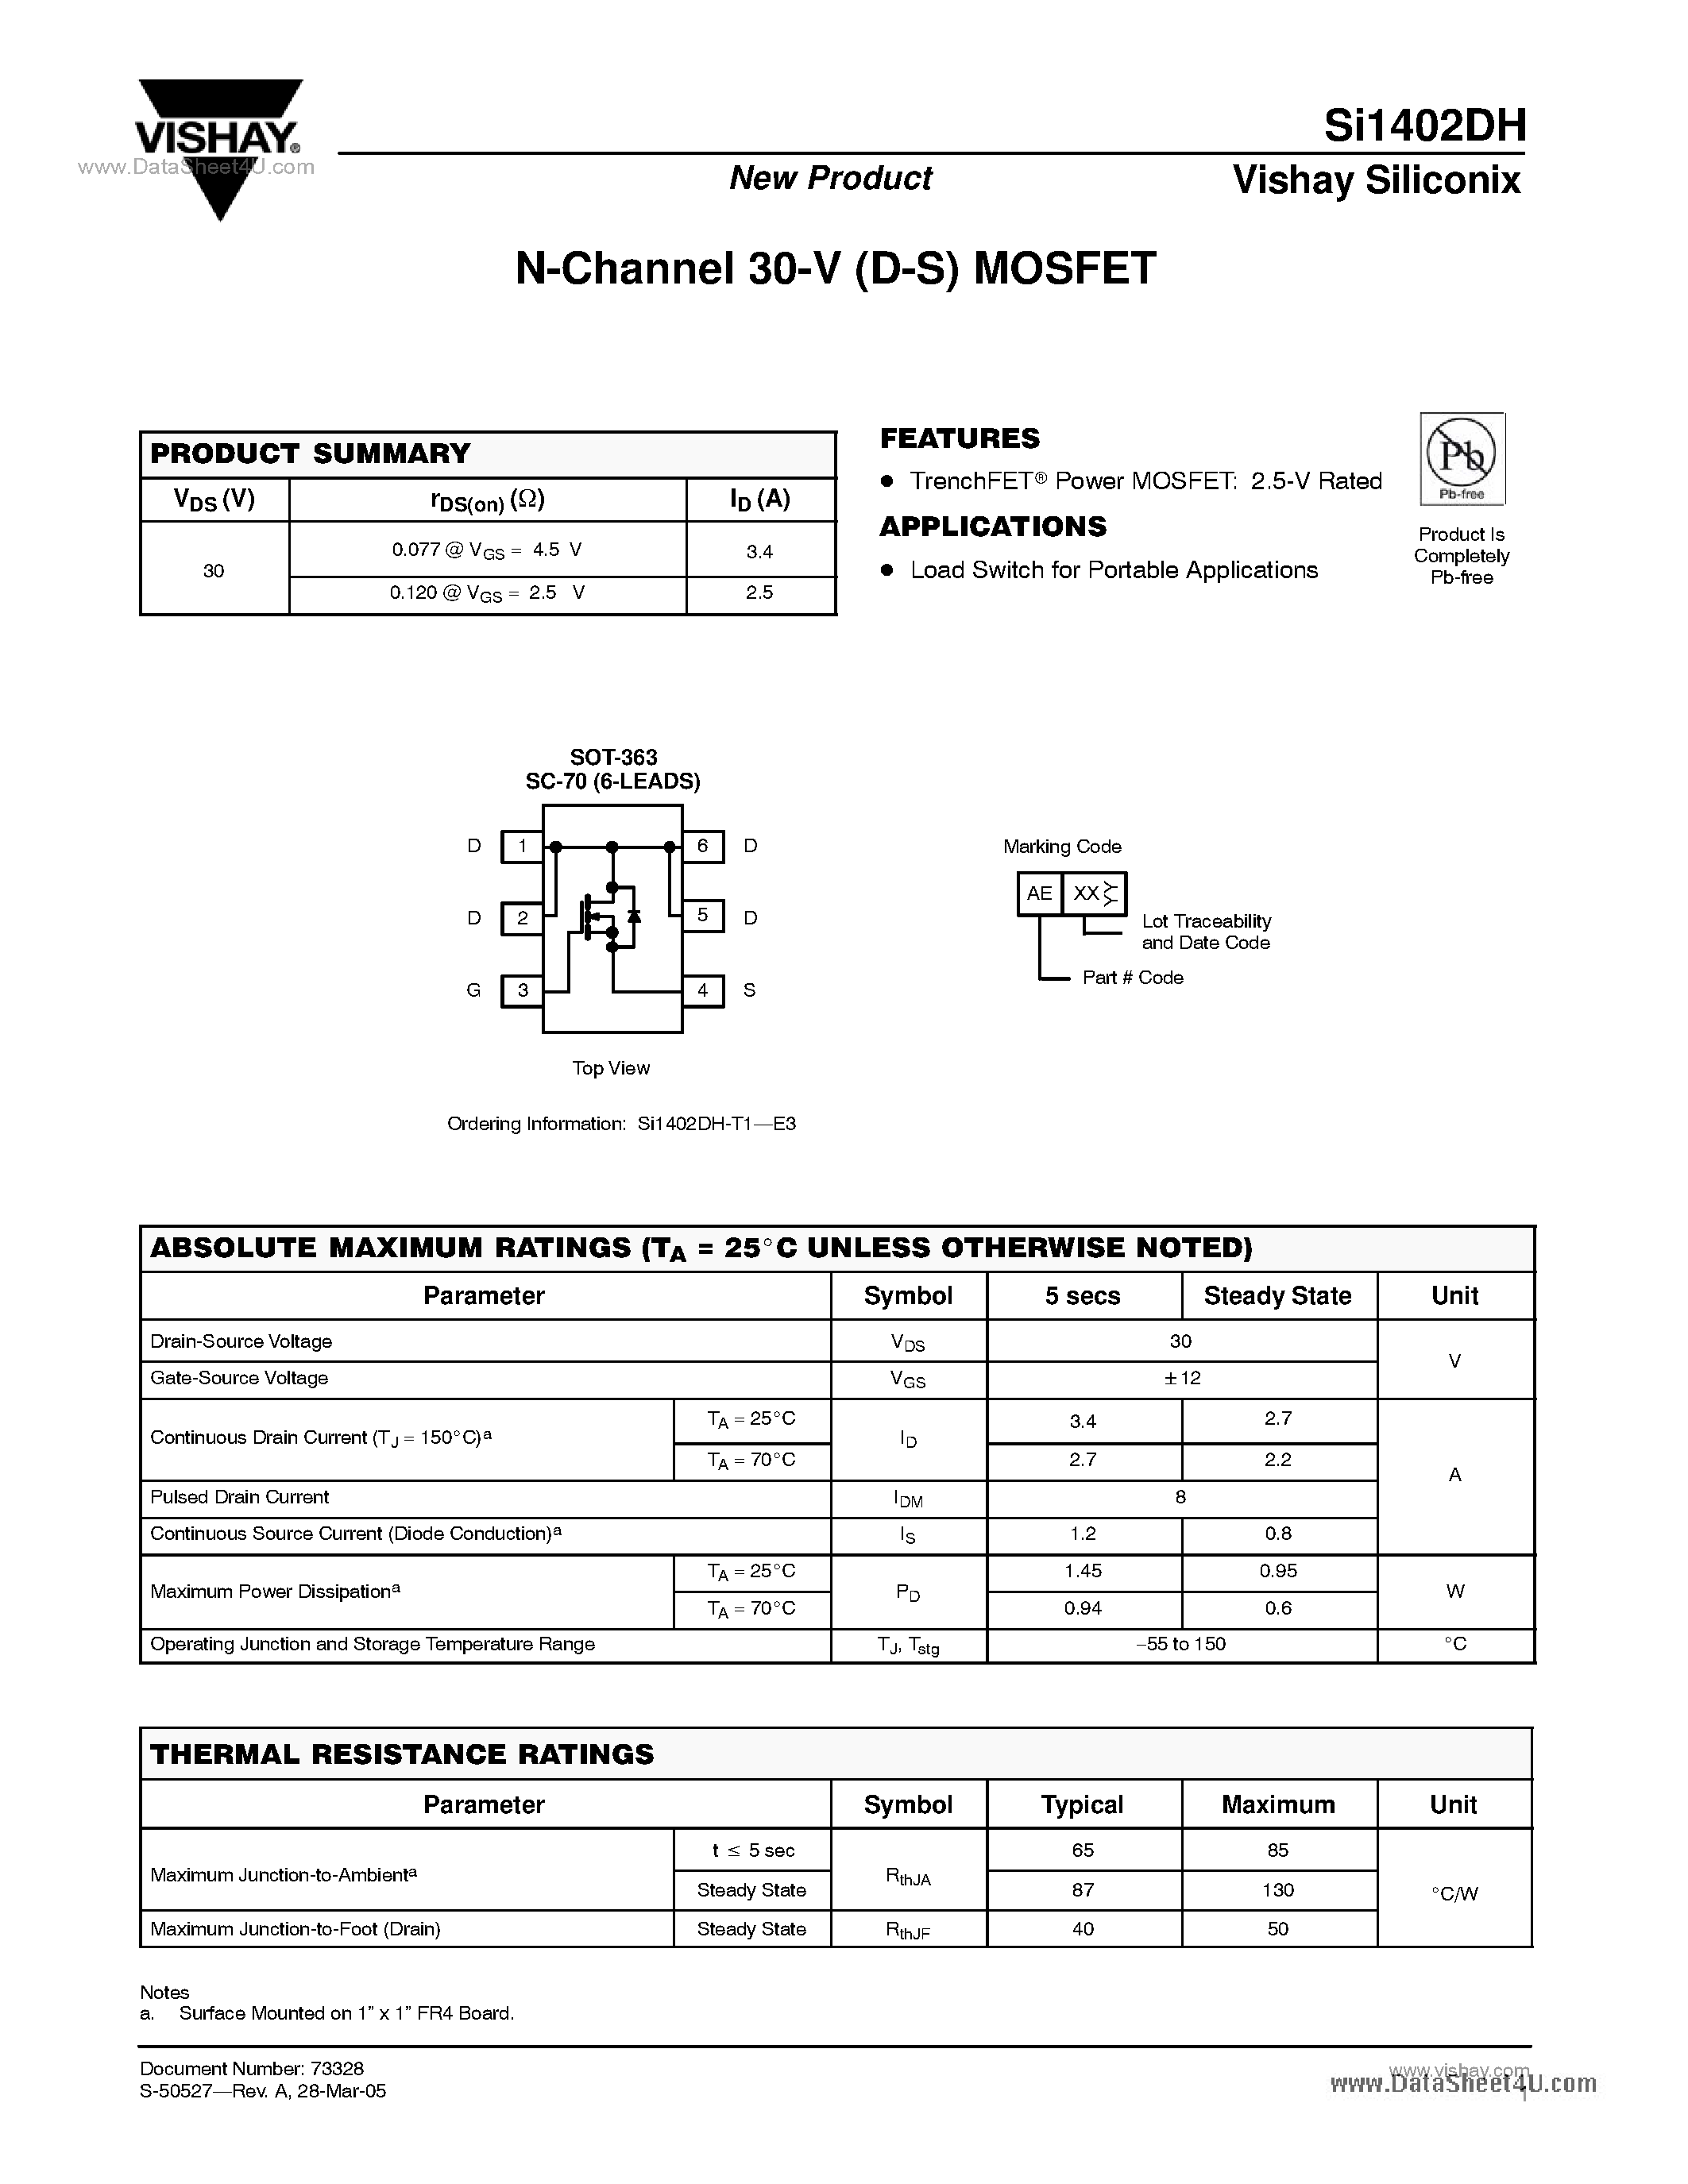 Datasheet SI1402DH - N-Channel 30-V (D-S) MOSFET page 1